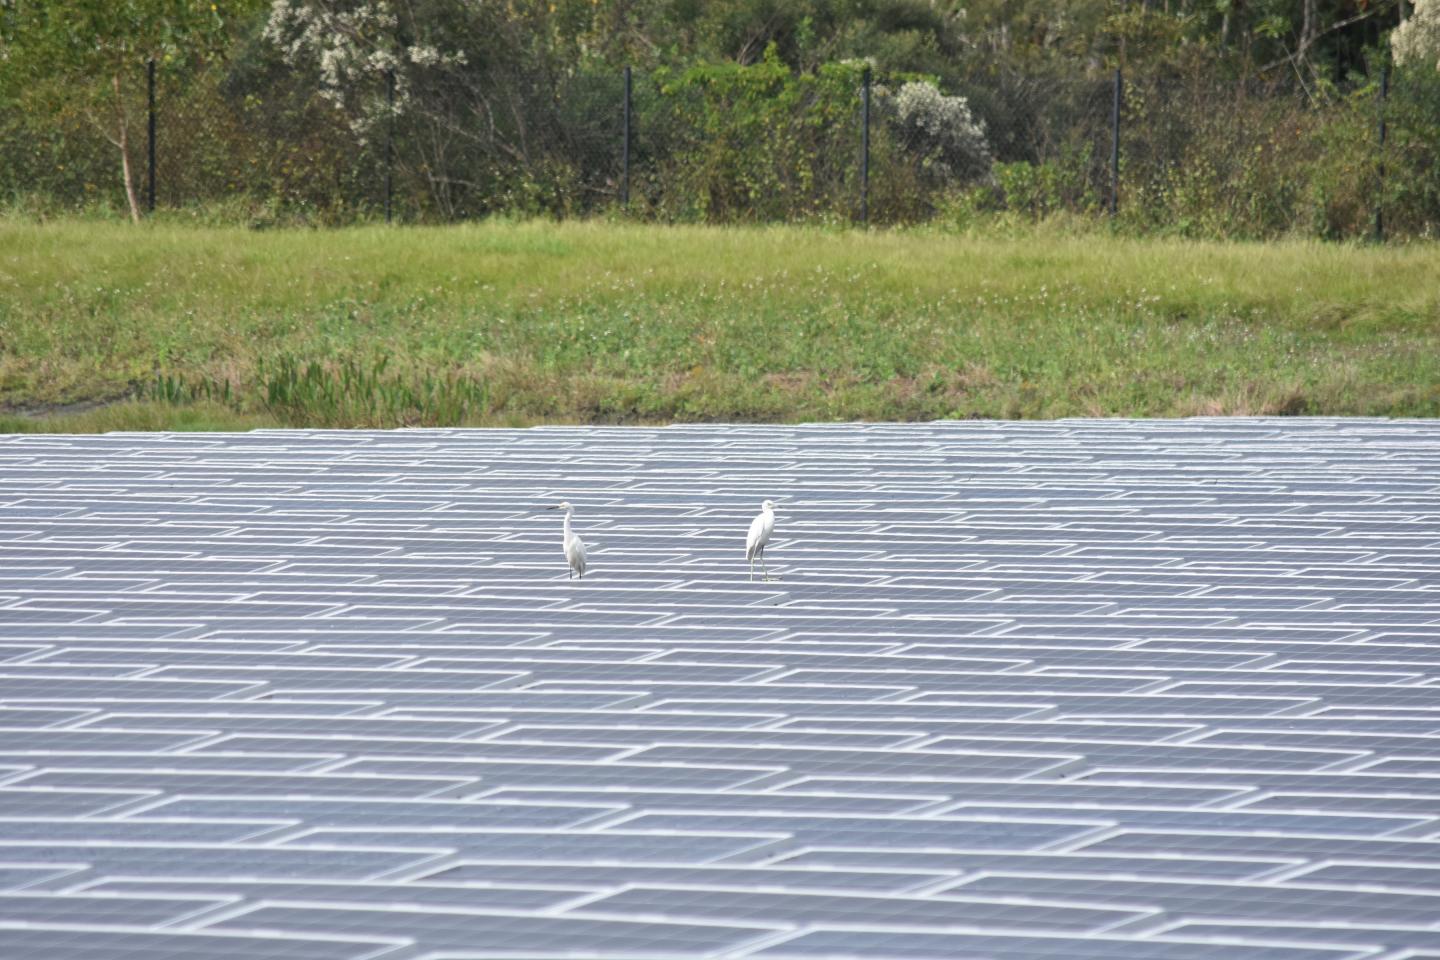 Two egrets on floatovoltaics